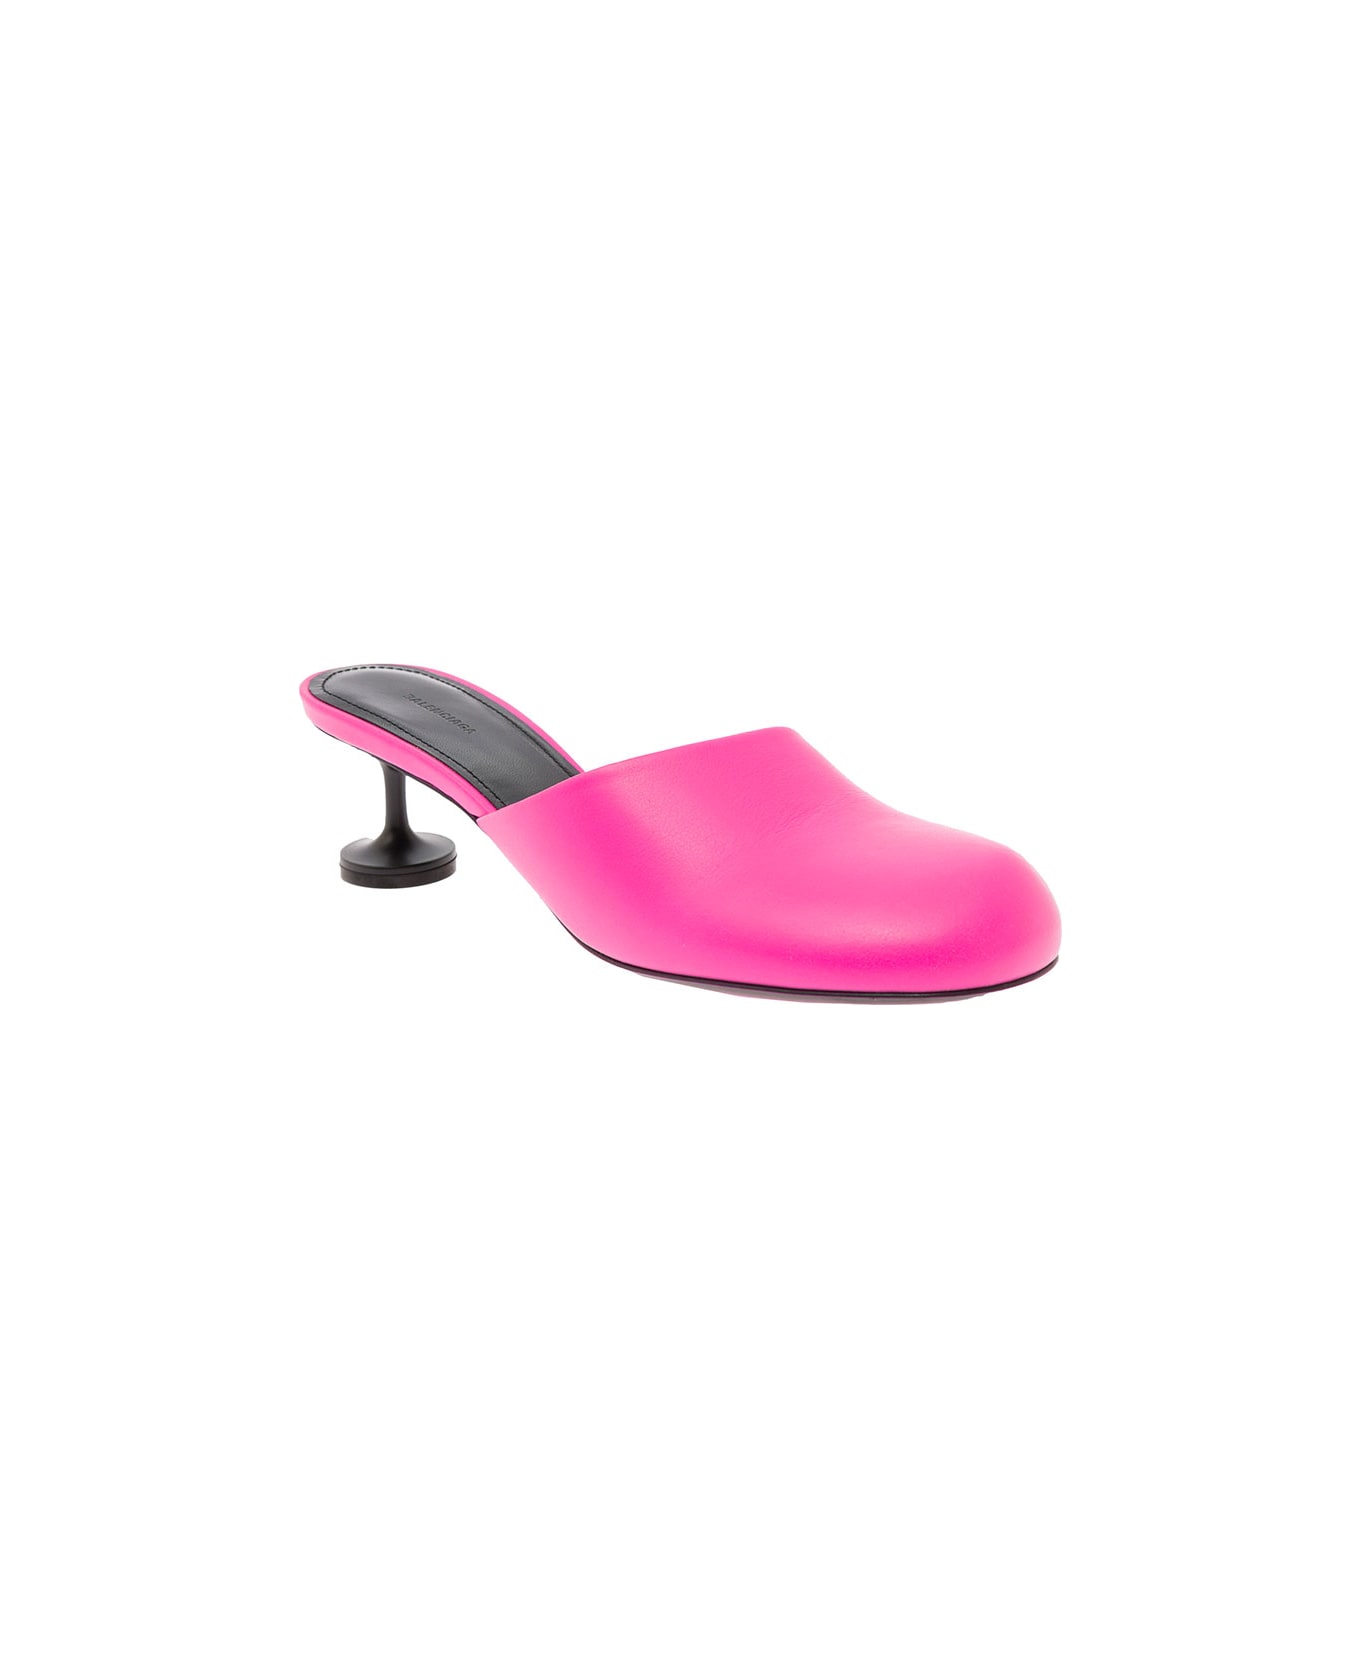 Balenciaga Fluo Pink Lady Mule In Leather With Champagne Heel Balenciaga Woman - Pink